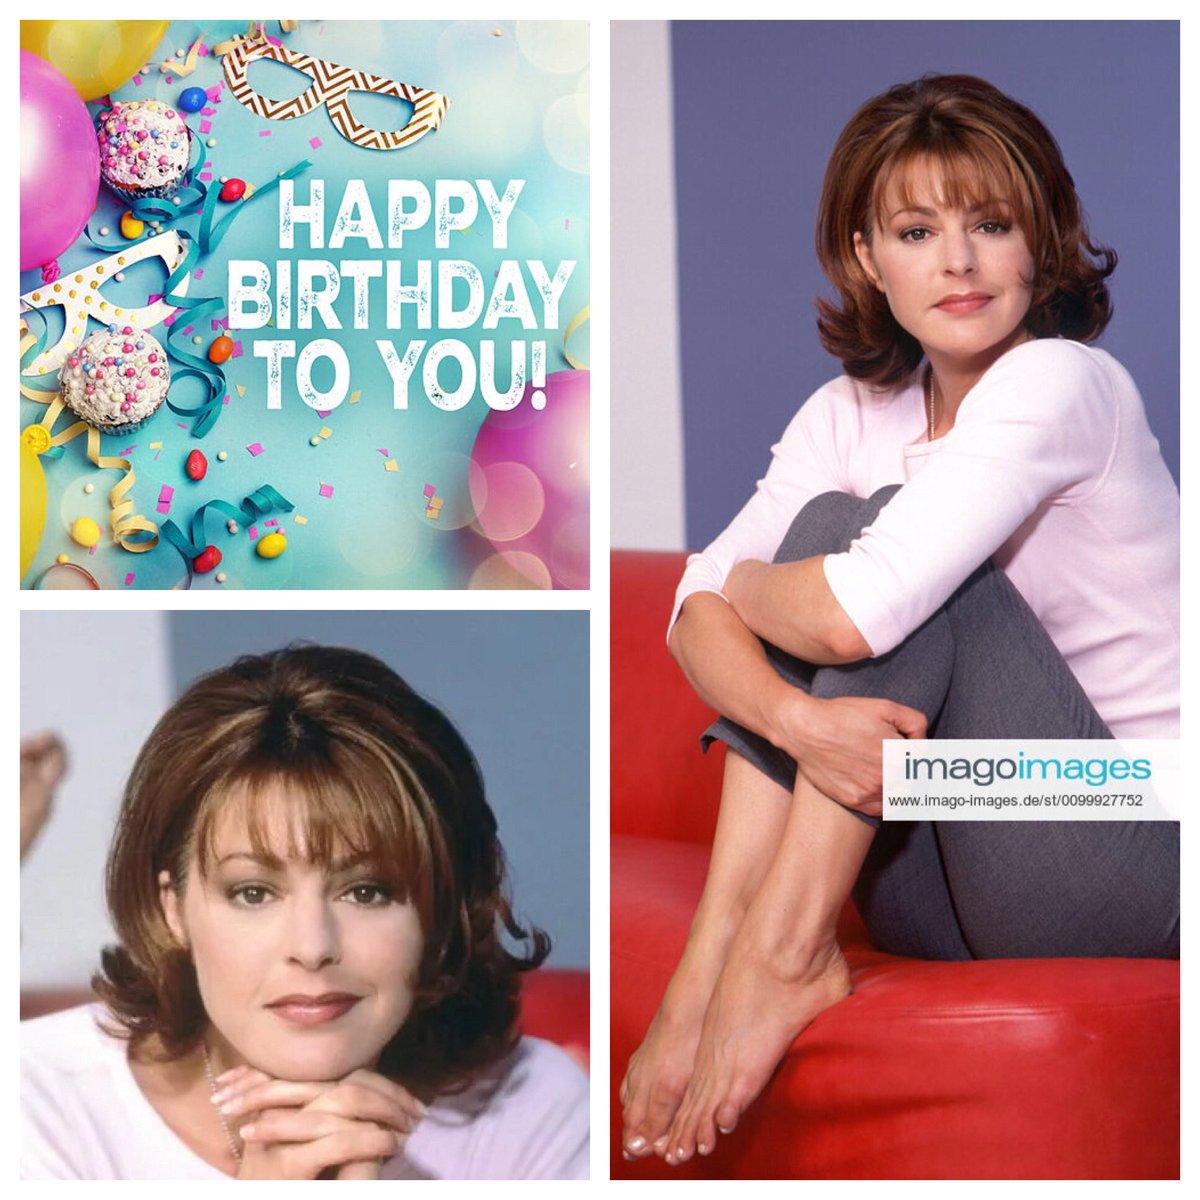 Happy birthday @JaneLeeves!! I hope you have a fabulous day!!